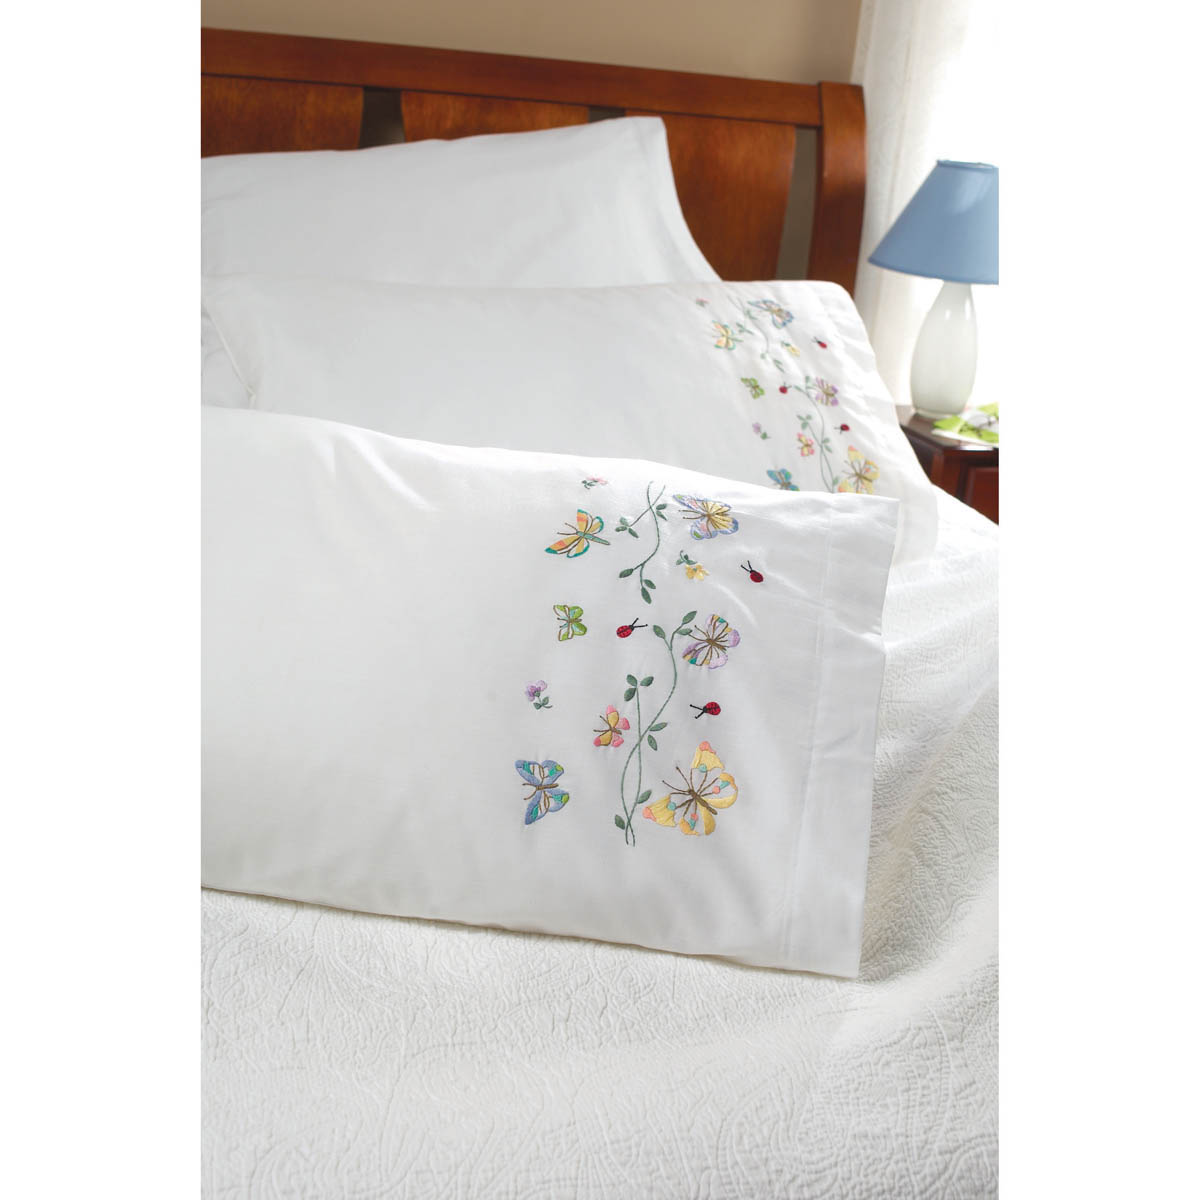 Bucilla ® Stamped Cross Stitch & Embroidery - Pillowcase Pairs - Butterflies in Flight - 45076